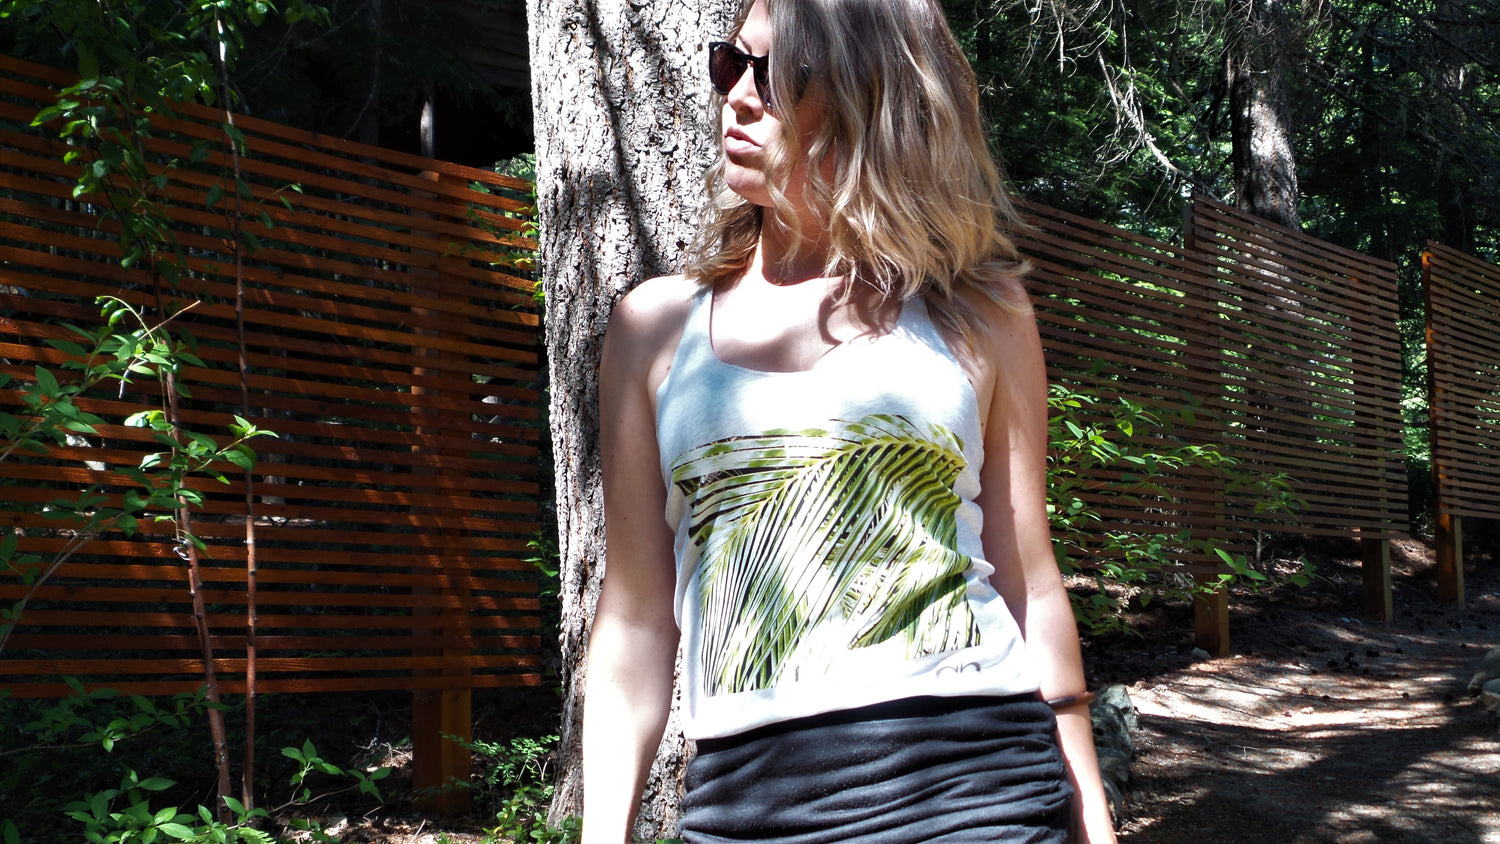 Anieta Breathe photography art from Whistler BC, Canada. Model wearing Filtered Palm Tank top